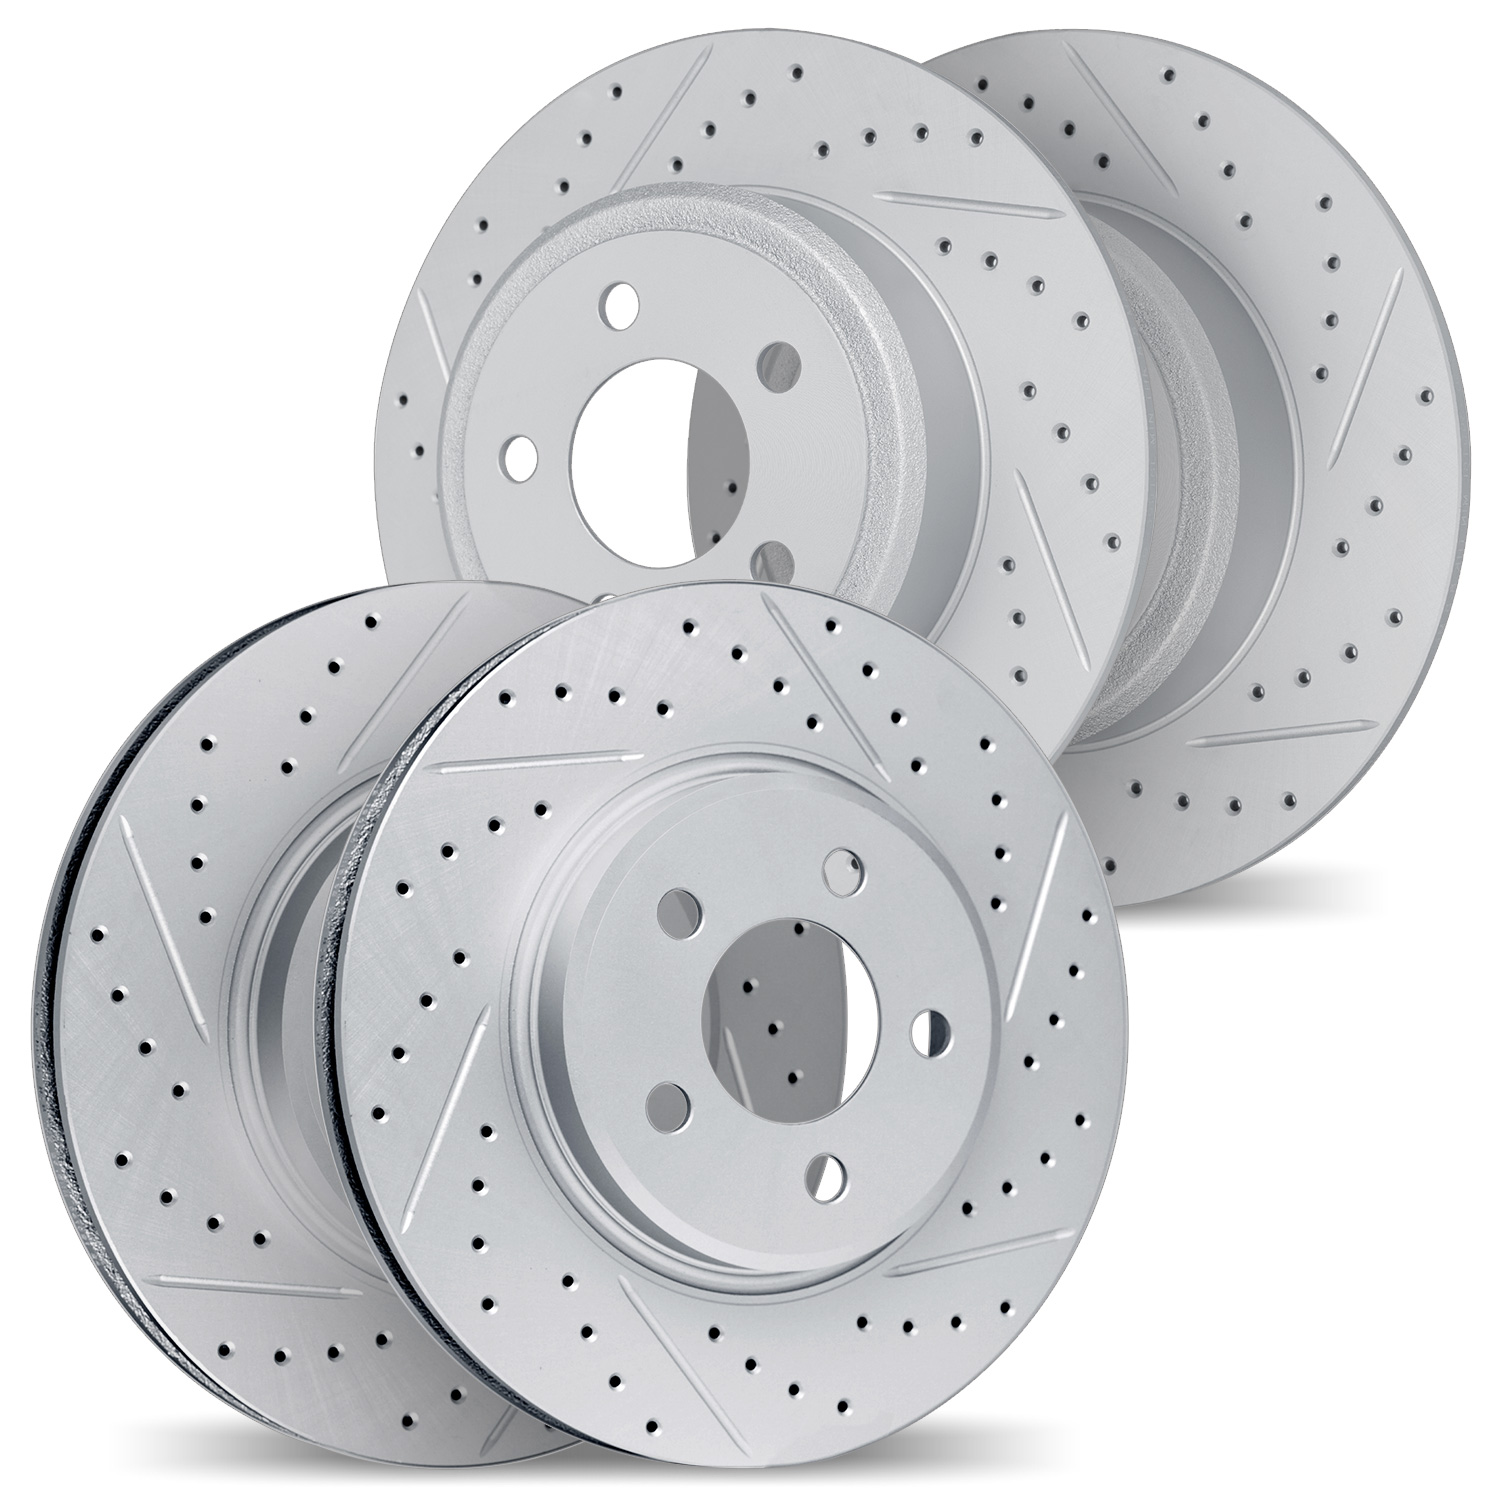 2004-39019 Geoperformance Drilled/Slotted Brake Rotors, 2006-2007 Mopar, Position: Front and Rear